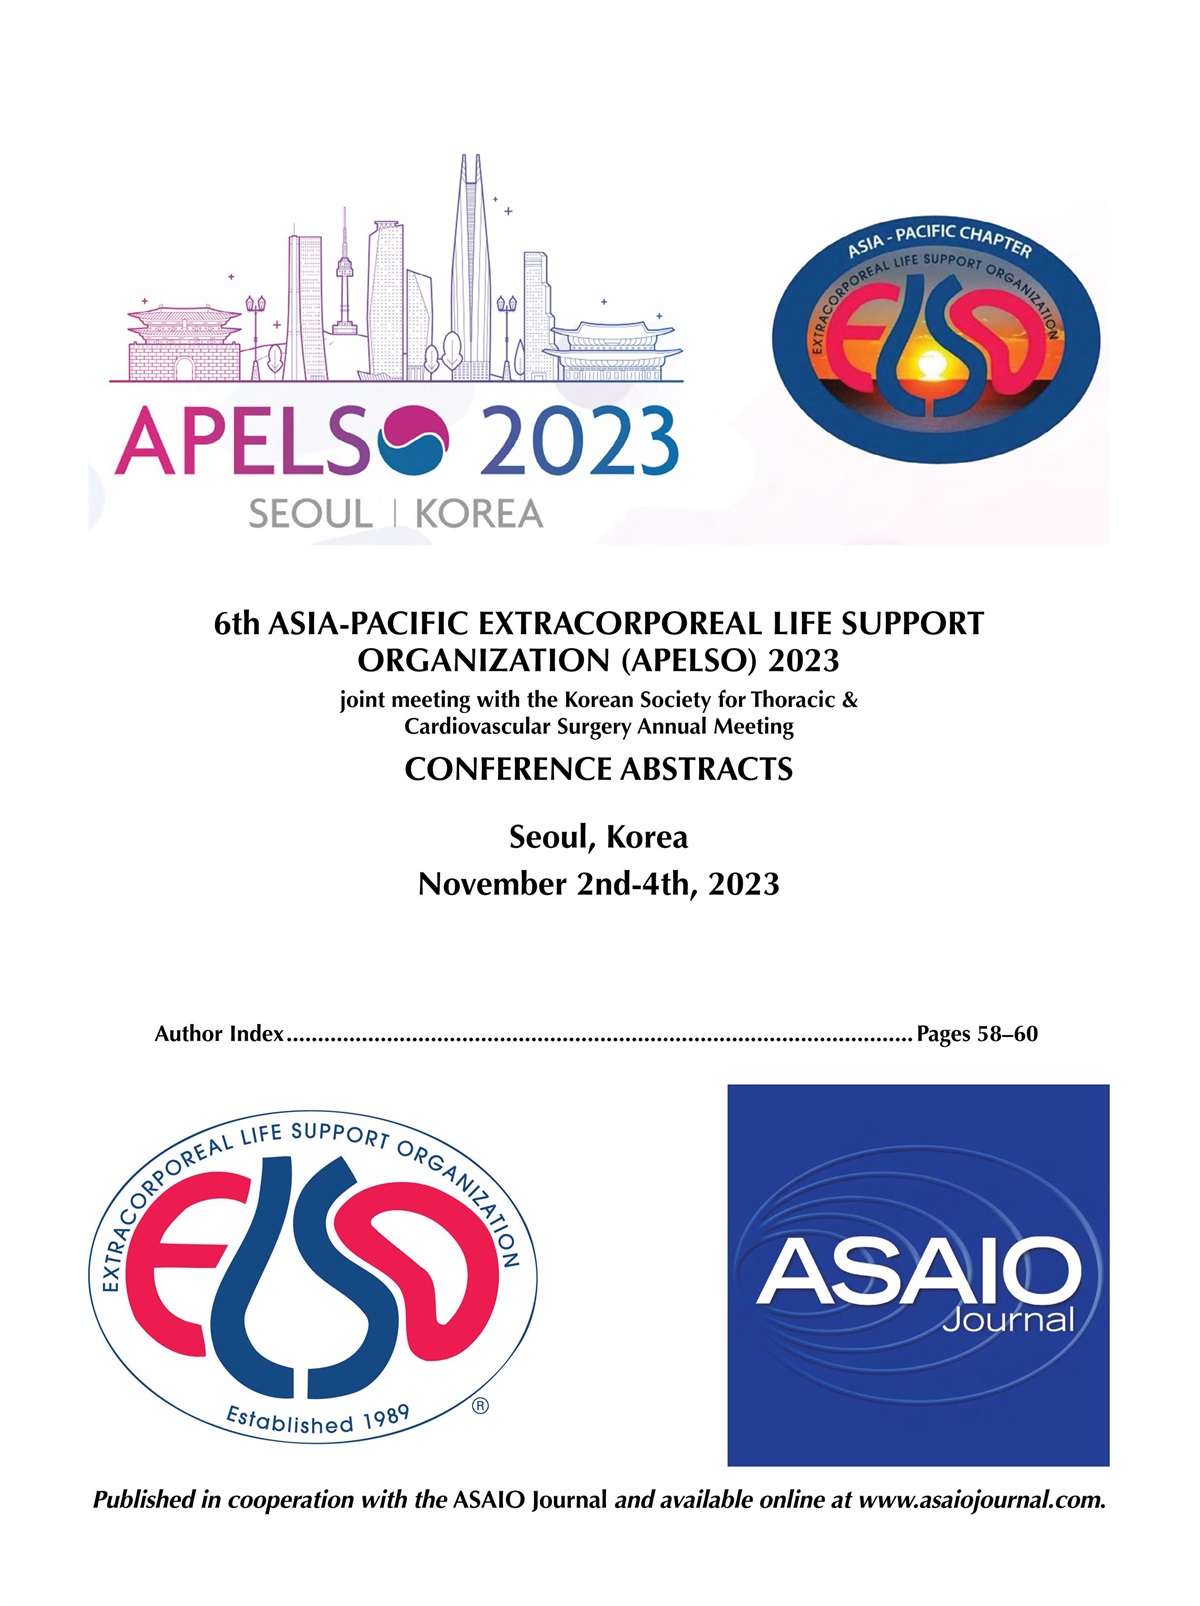 6th ASIA-PACIFIC EXTRACORPOREAL LIFE SUPPORT ORGANIZATION (APELSO) 2023 CONFERENCE ABSTRACTS